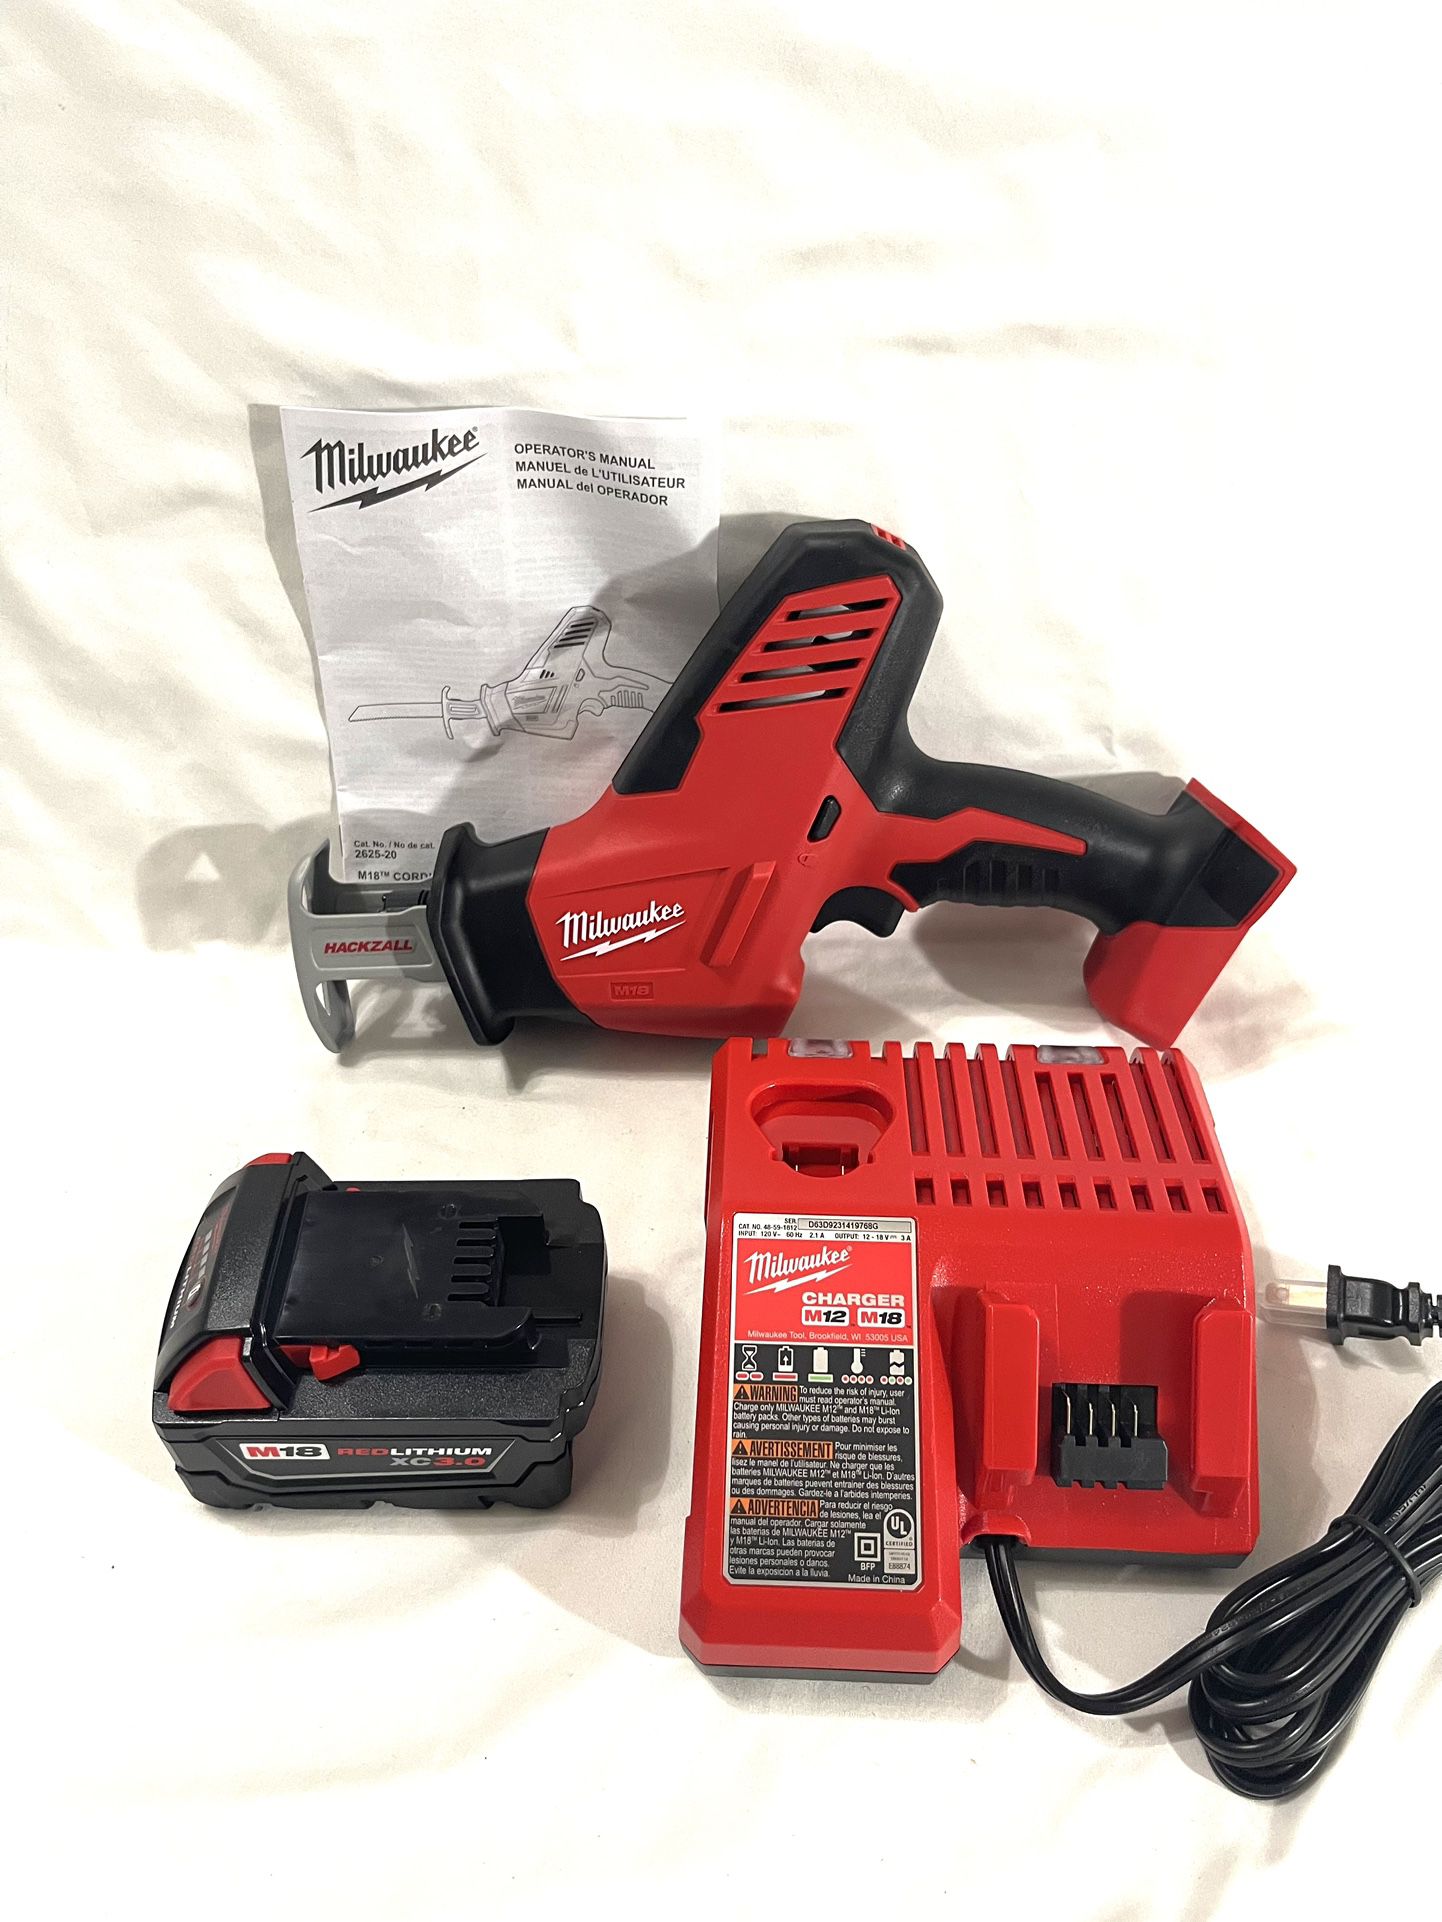 Brand New Milwaukee M18 One Handed Reciprocating Saw With 3Ah battery and charger